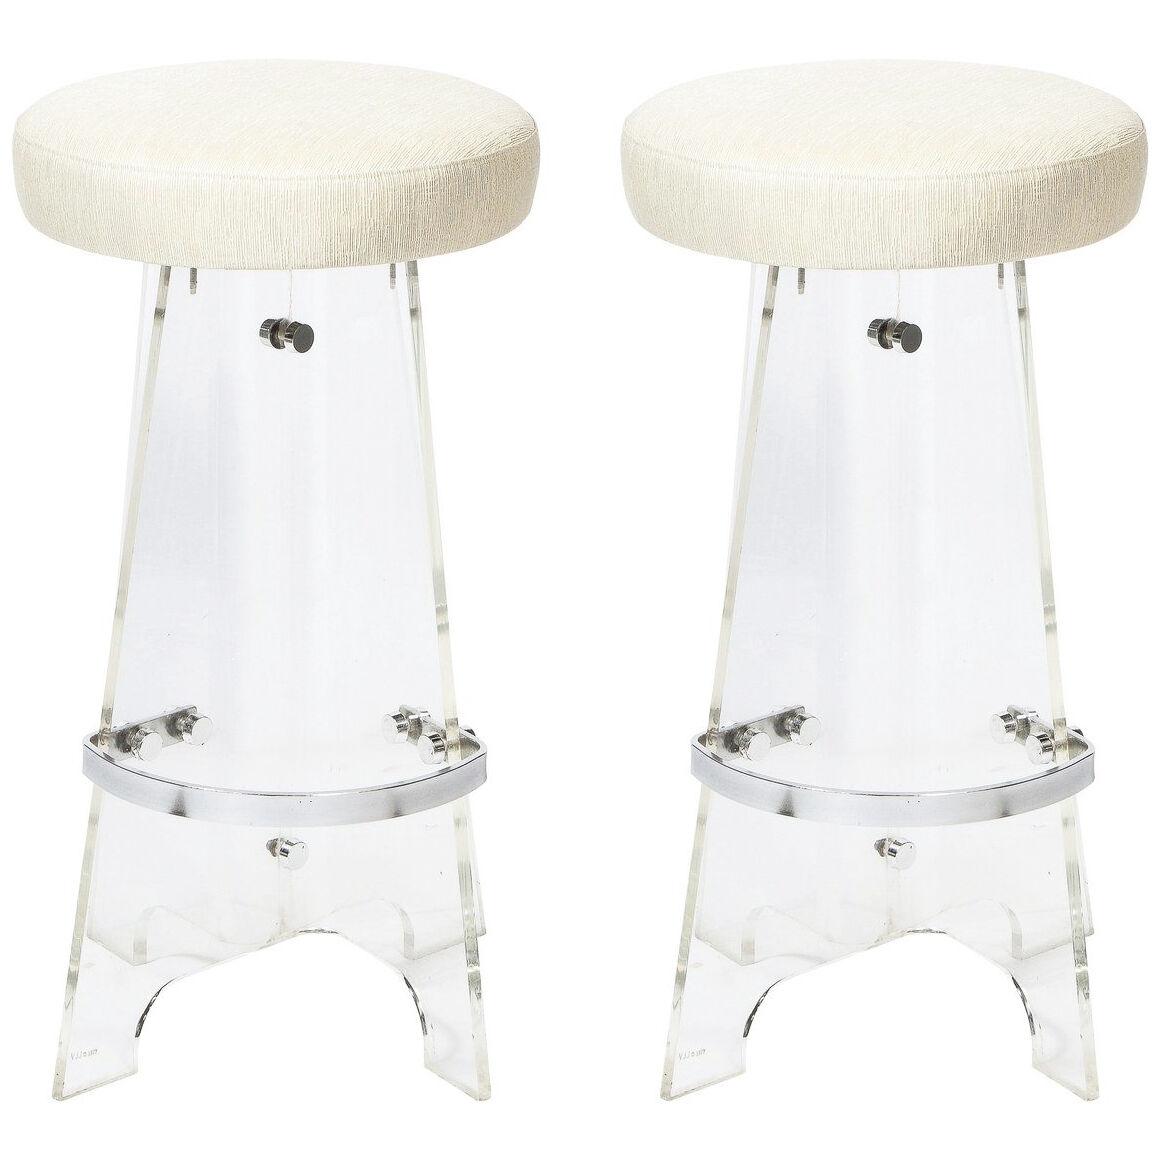 Pair of Mid Century Modern Lucite, Chrome Bar Stools in Holly Hunt Upholstery